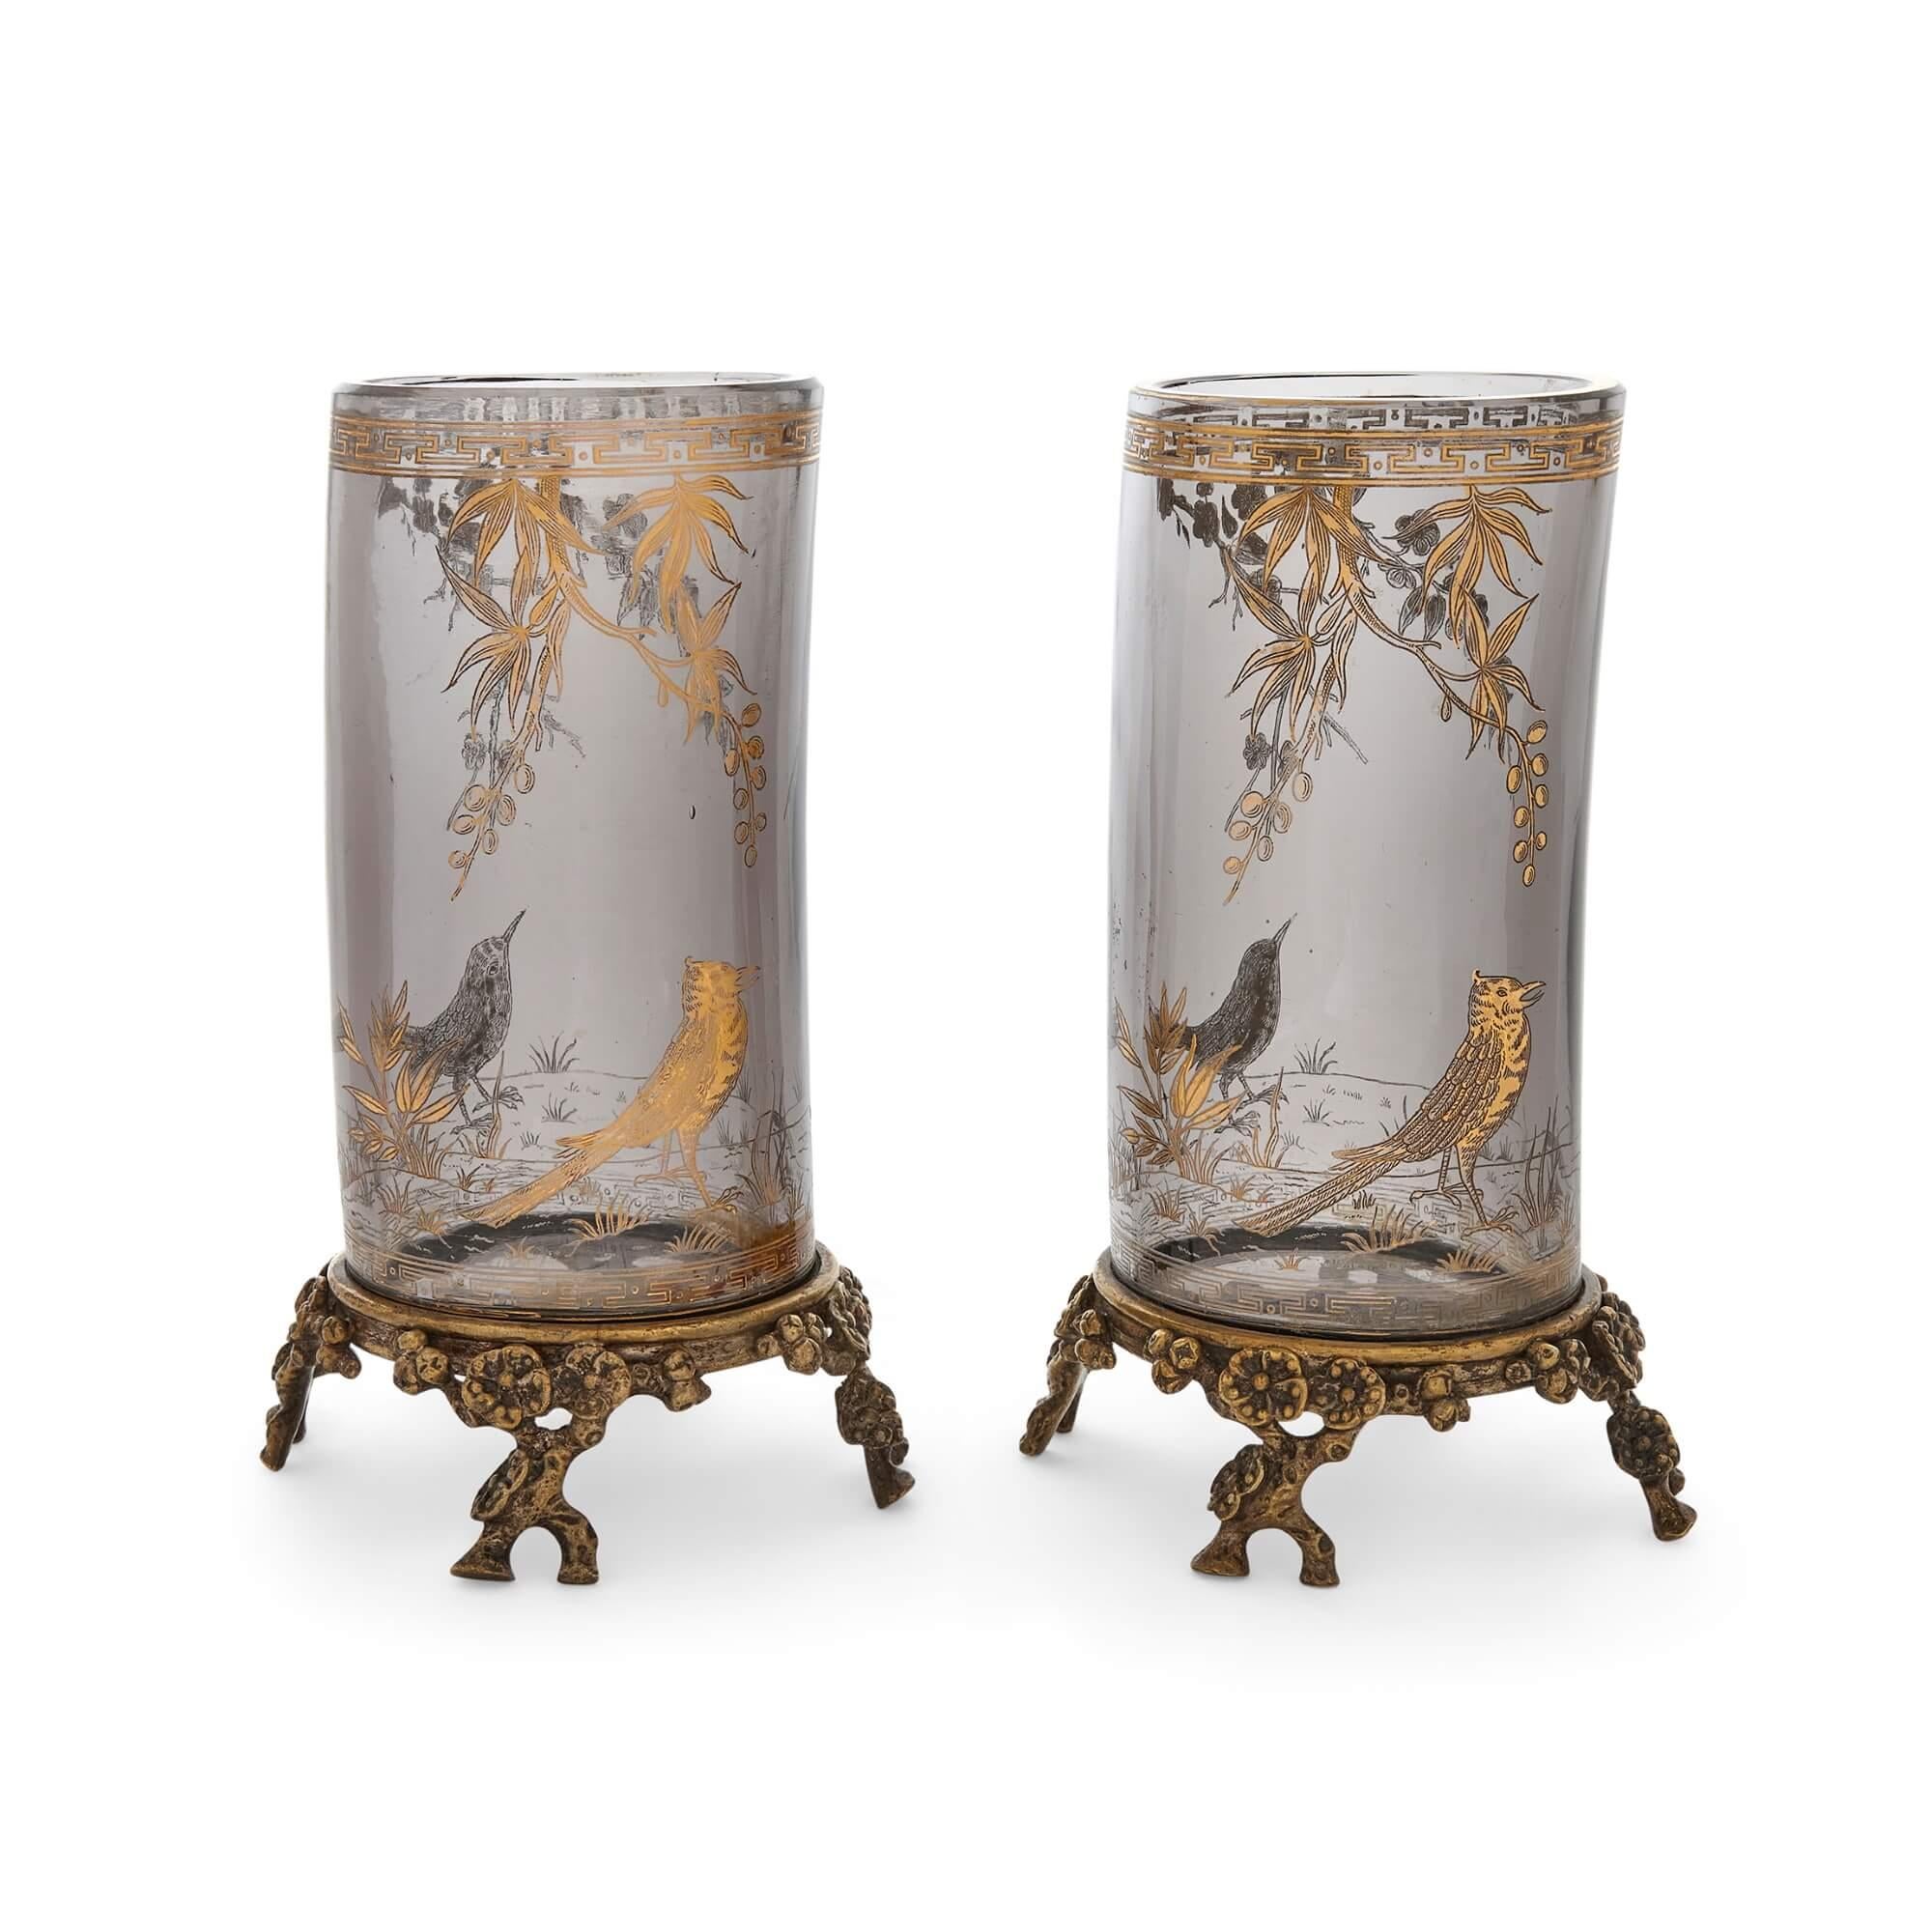 Pair of silvered and gilt-bronze mounted glass vases by Baccarat
French, 19th Century
Height 20cm, width 13cm, depth 11cm

Mounted with silvered bronze and ormolu, these beautiful glass vases were made by the leading French firm Baccarat, taking